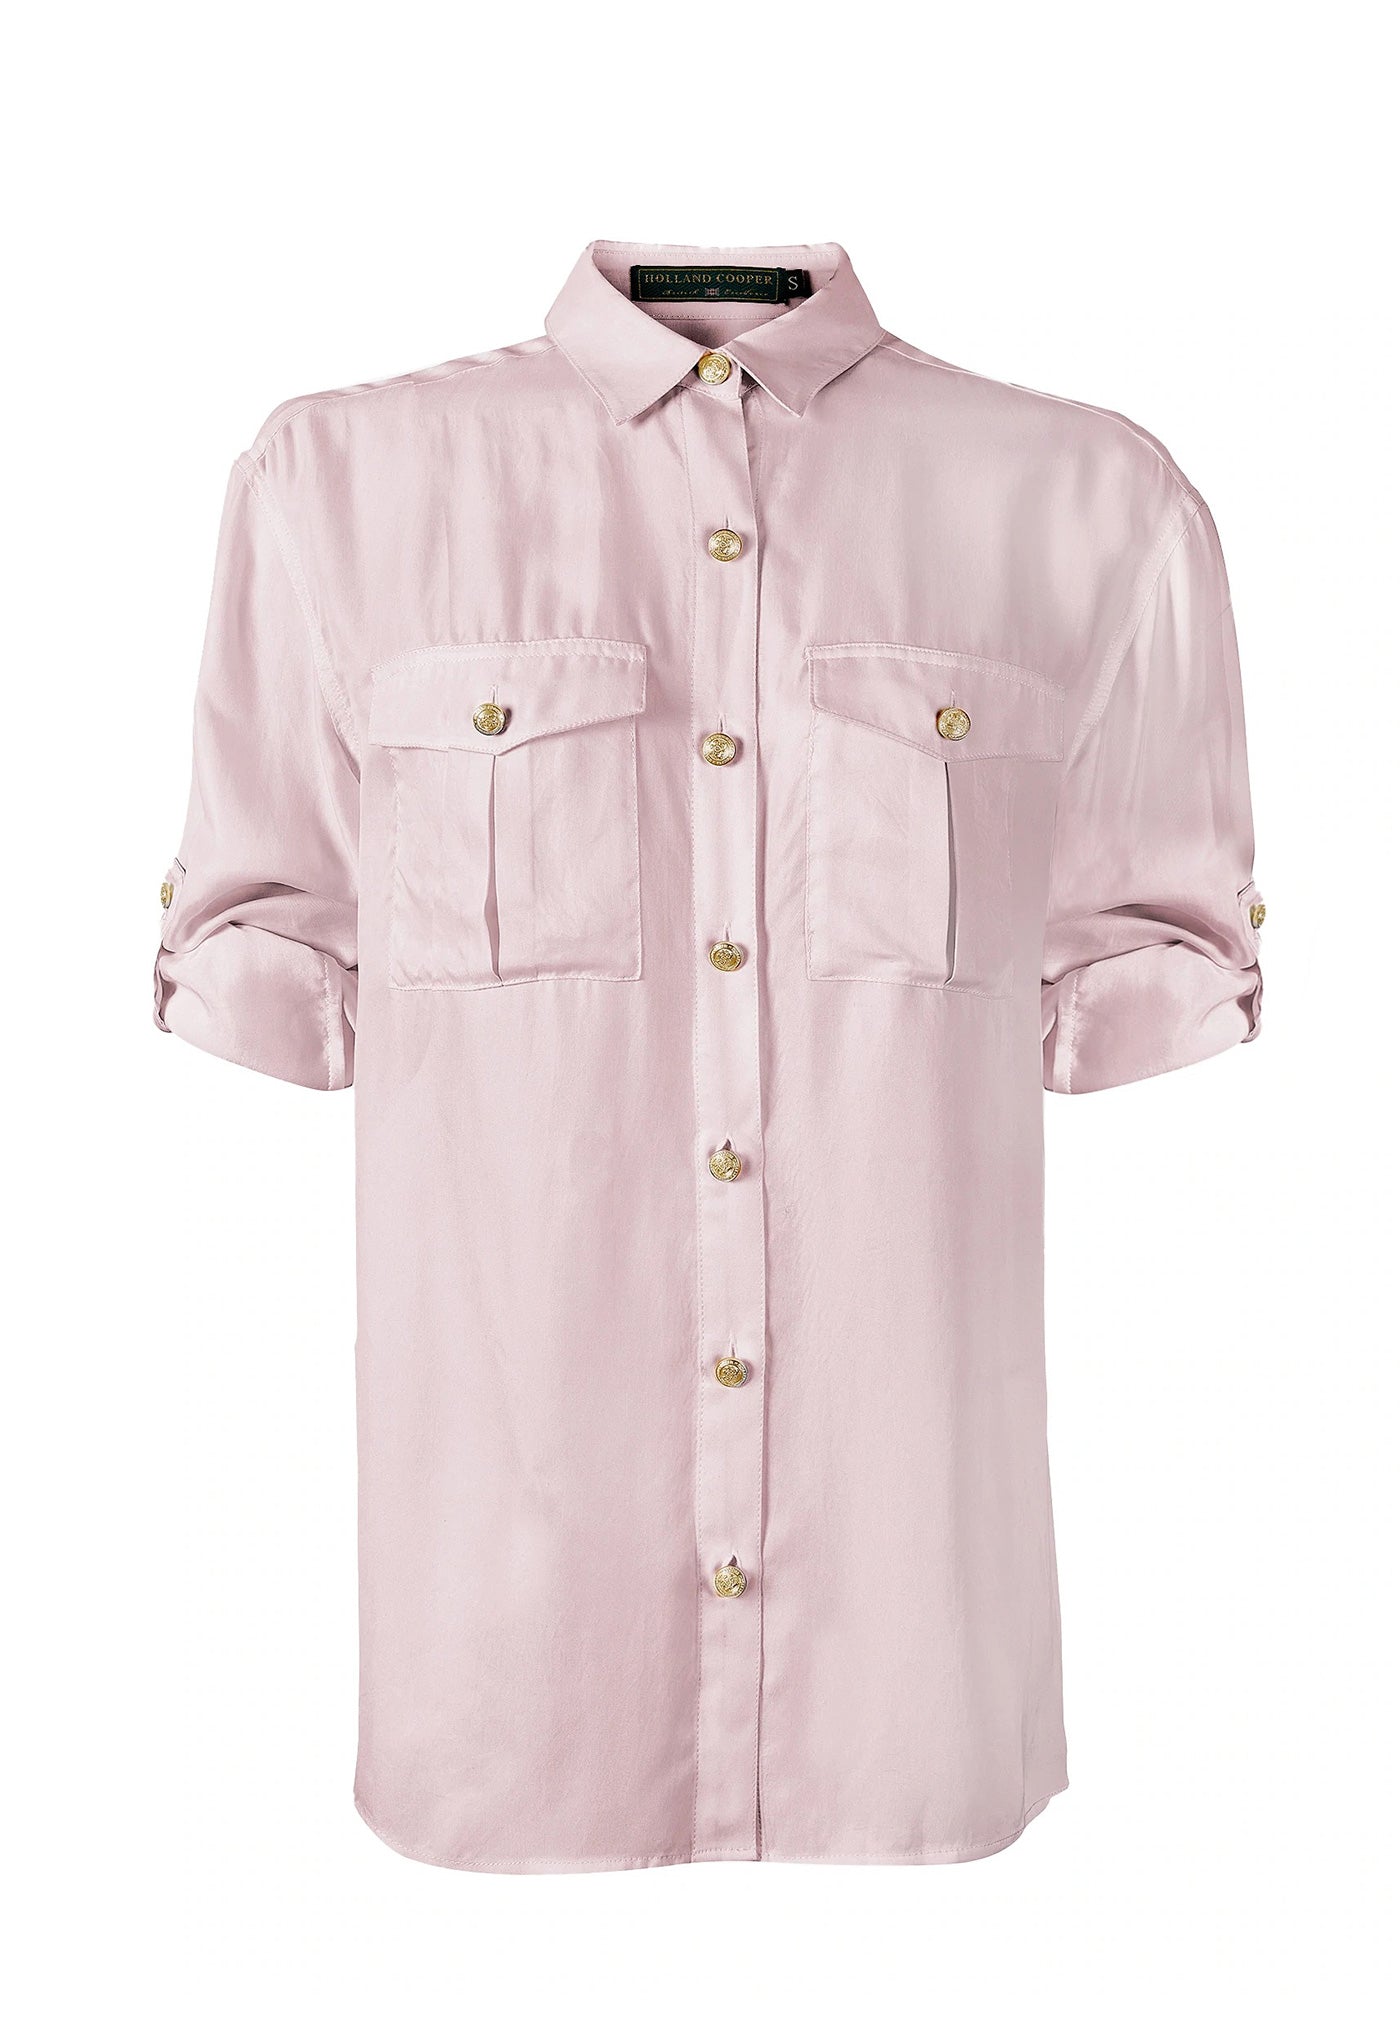 Relaxed Fit Military Shirt - Blush sold by Angel Divine